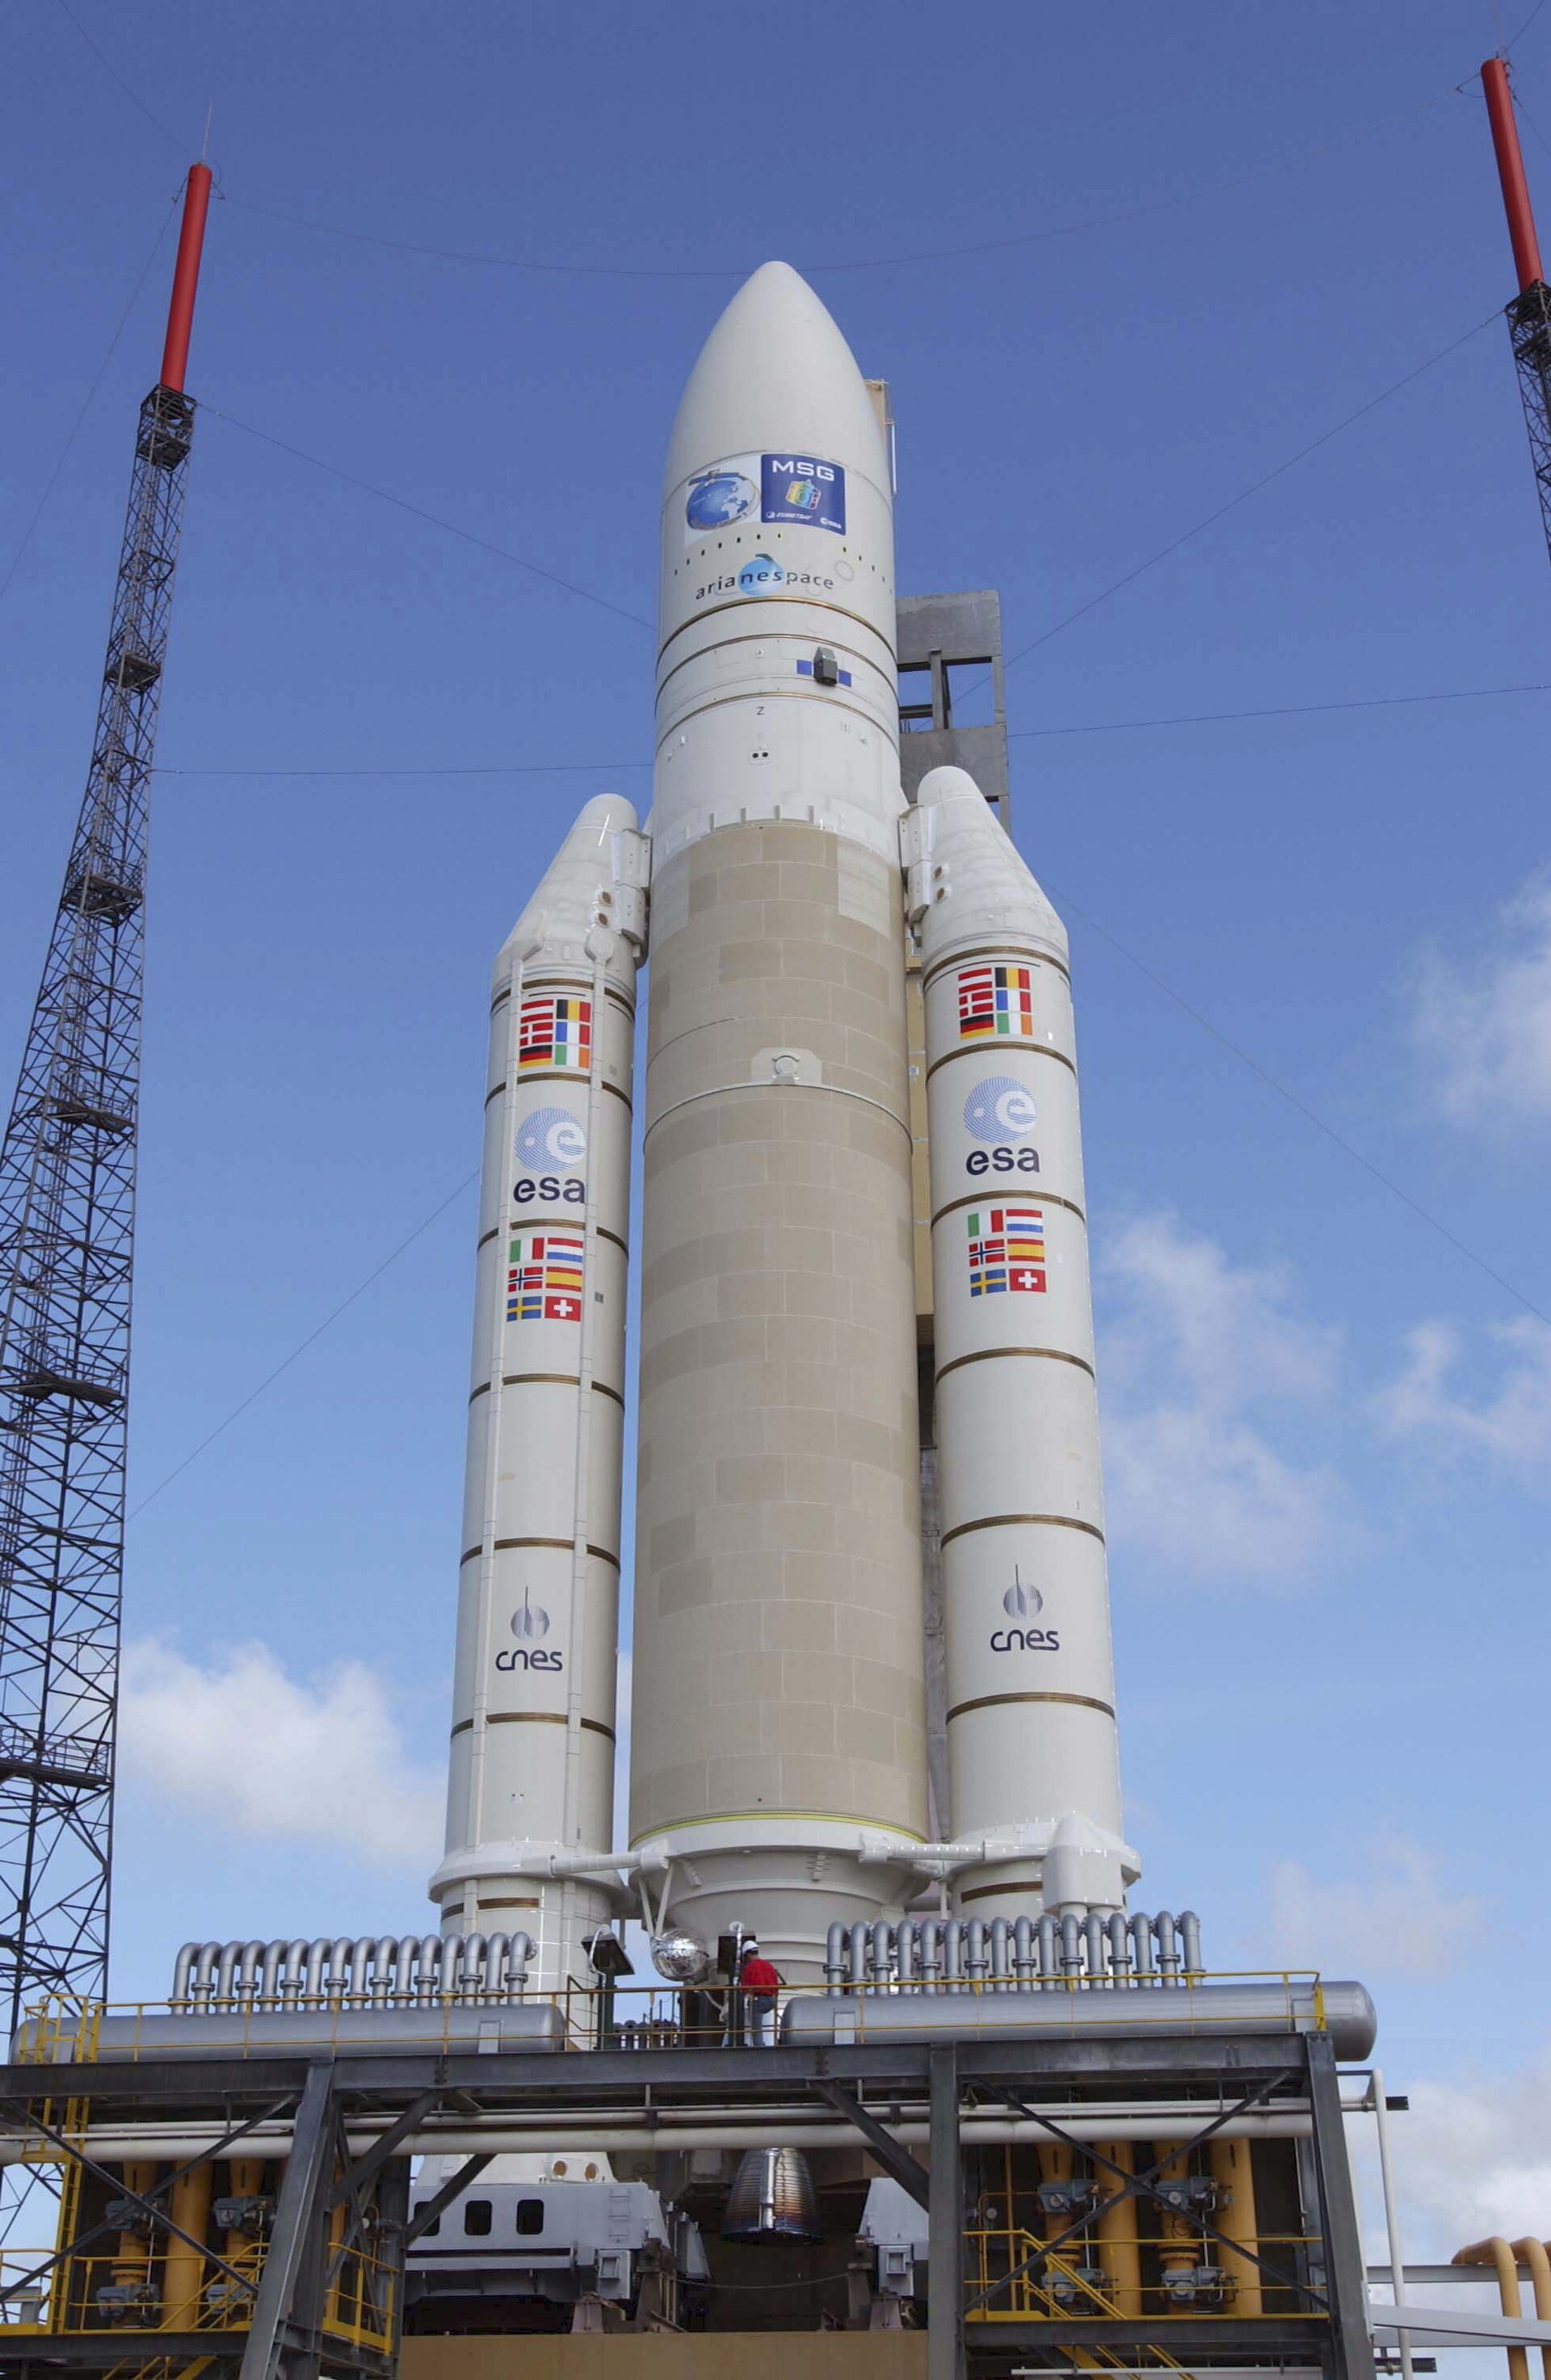 The European launcher Ariane 5 on its launch pad on ZL3